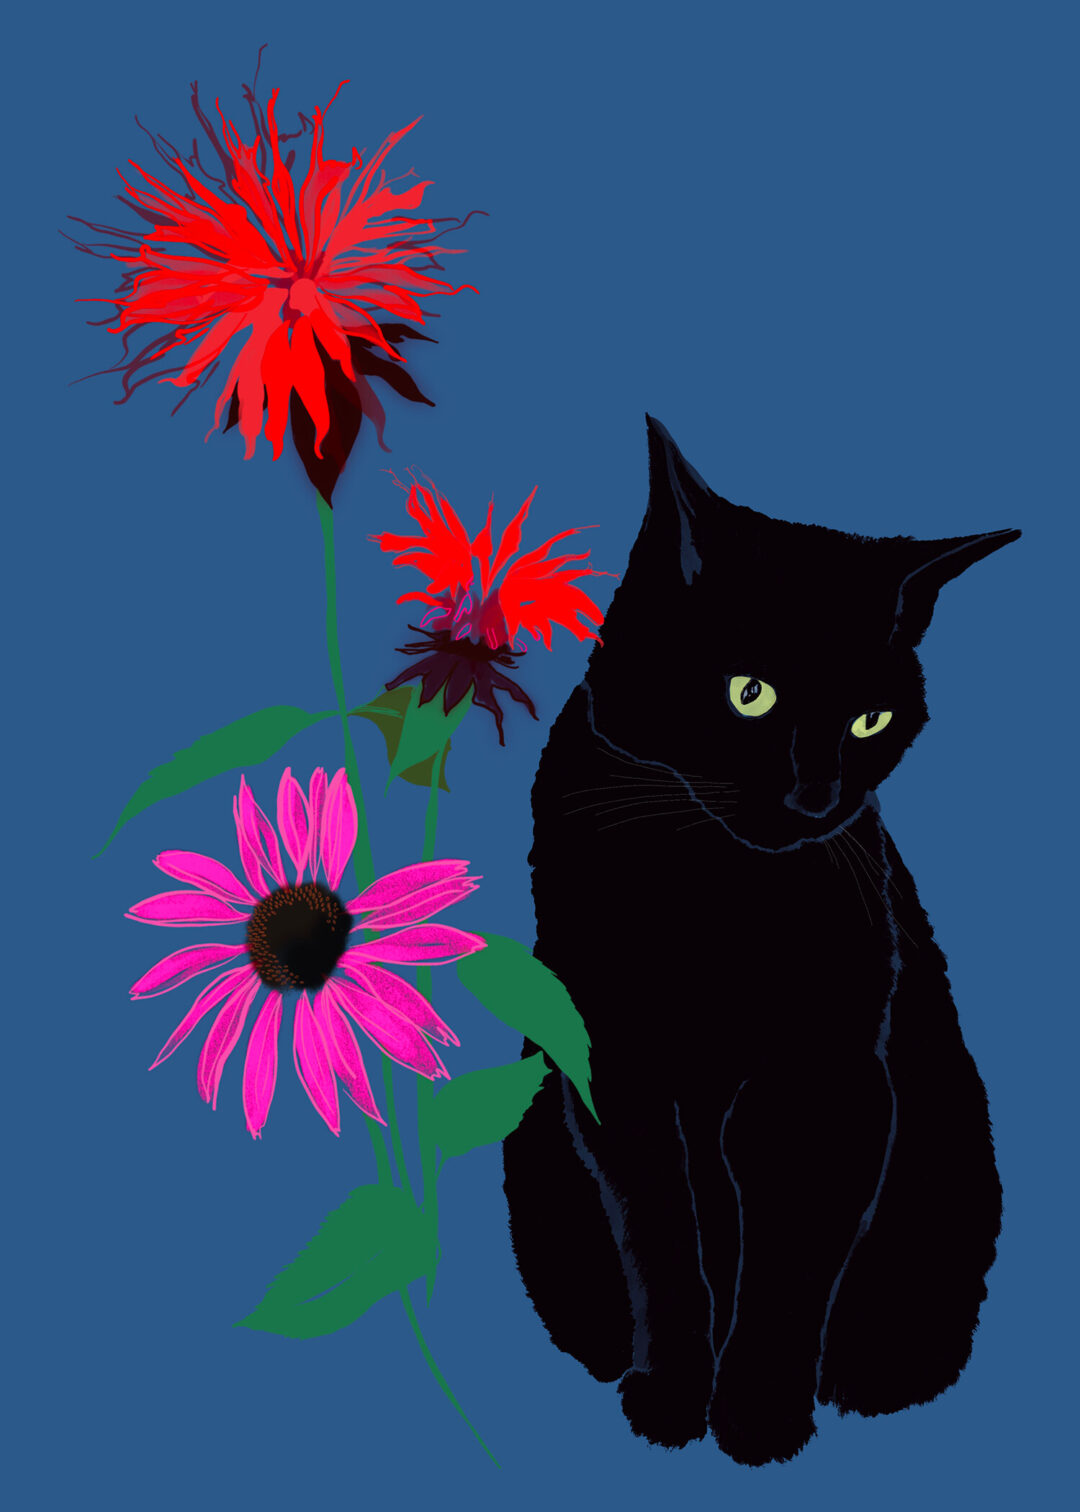 Black cat with wildflowers - FLORA editions Art Prints & Cards for Flower Lovers by Catherine Toews - Giclée fine art print on archival paper